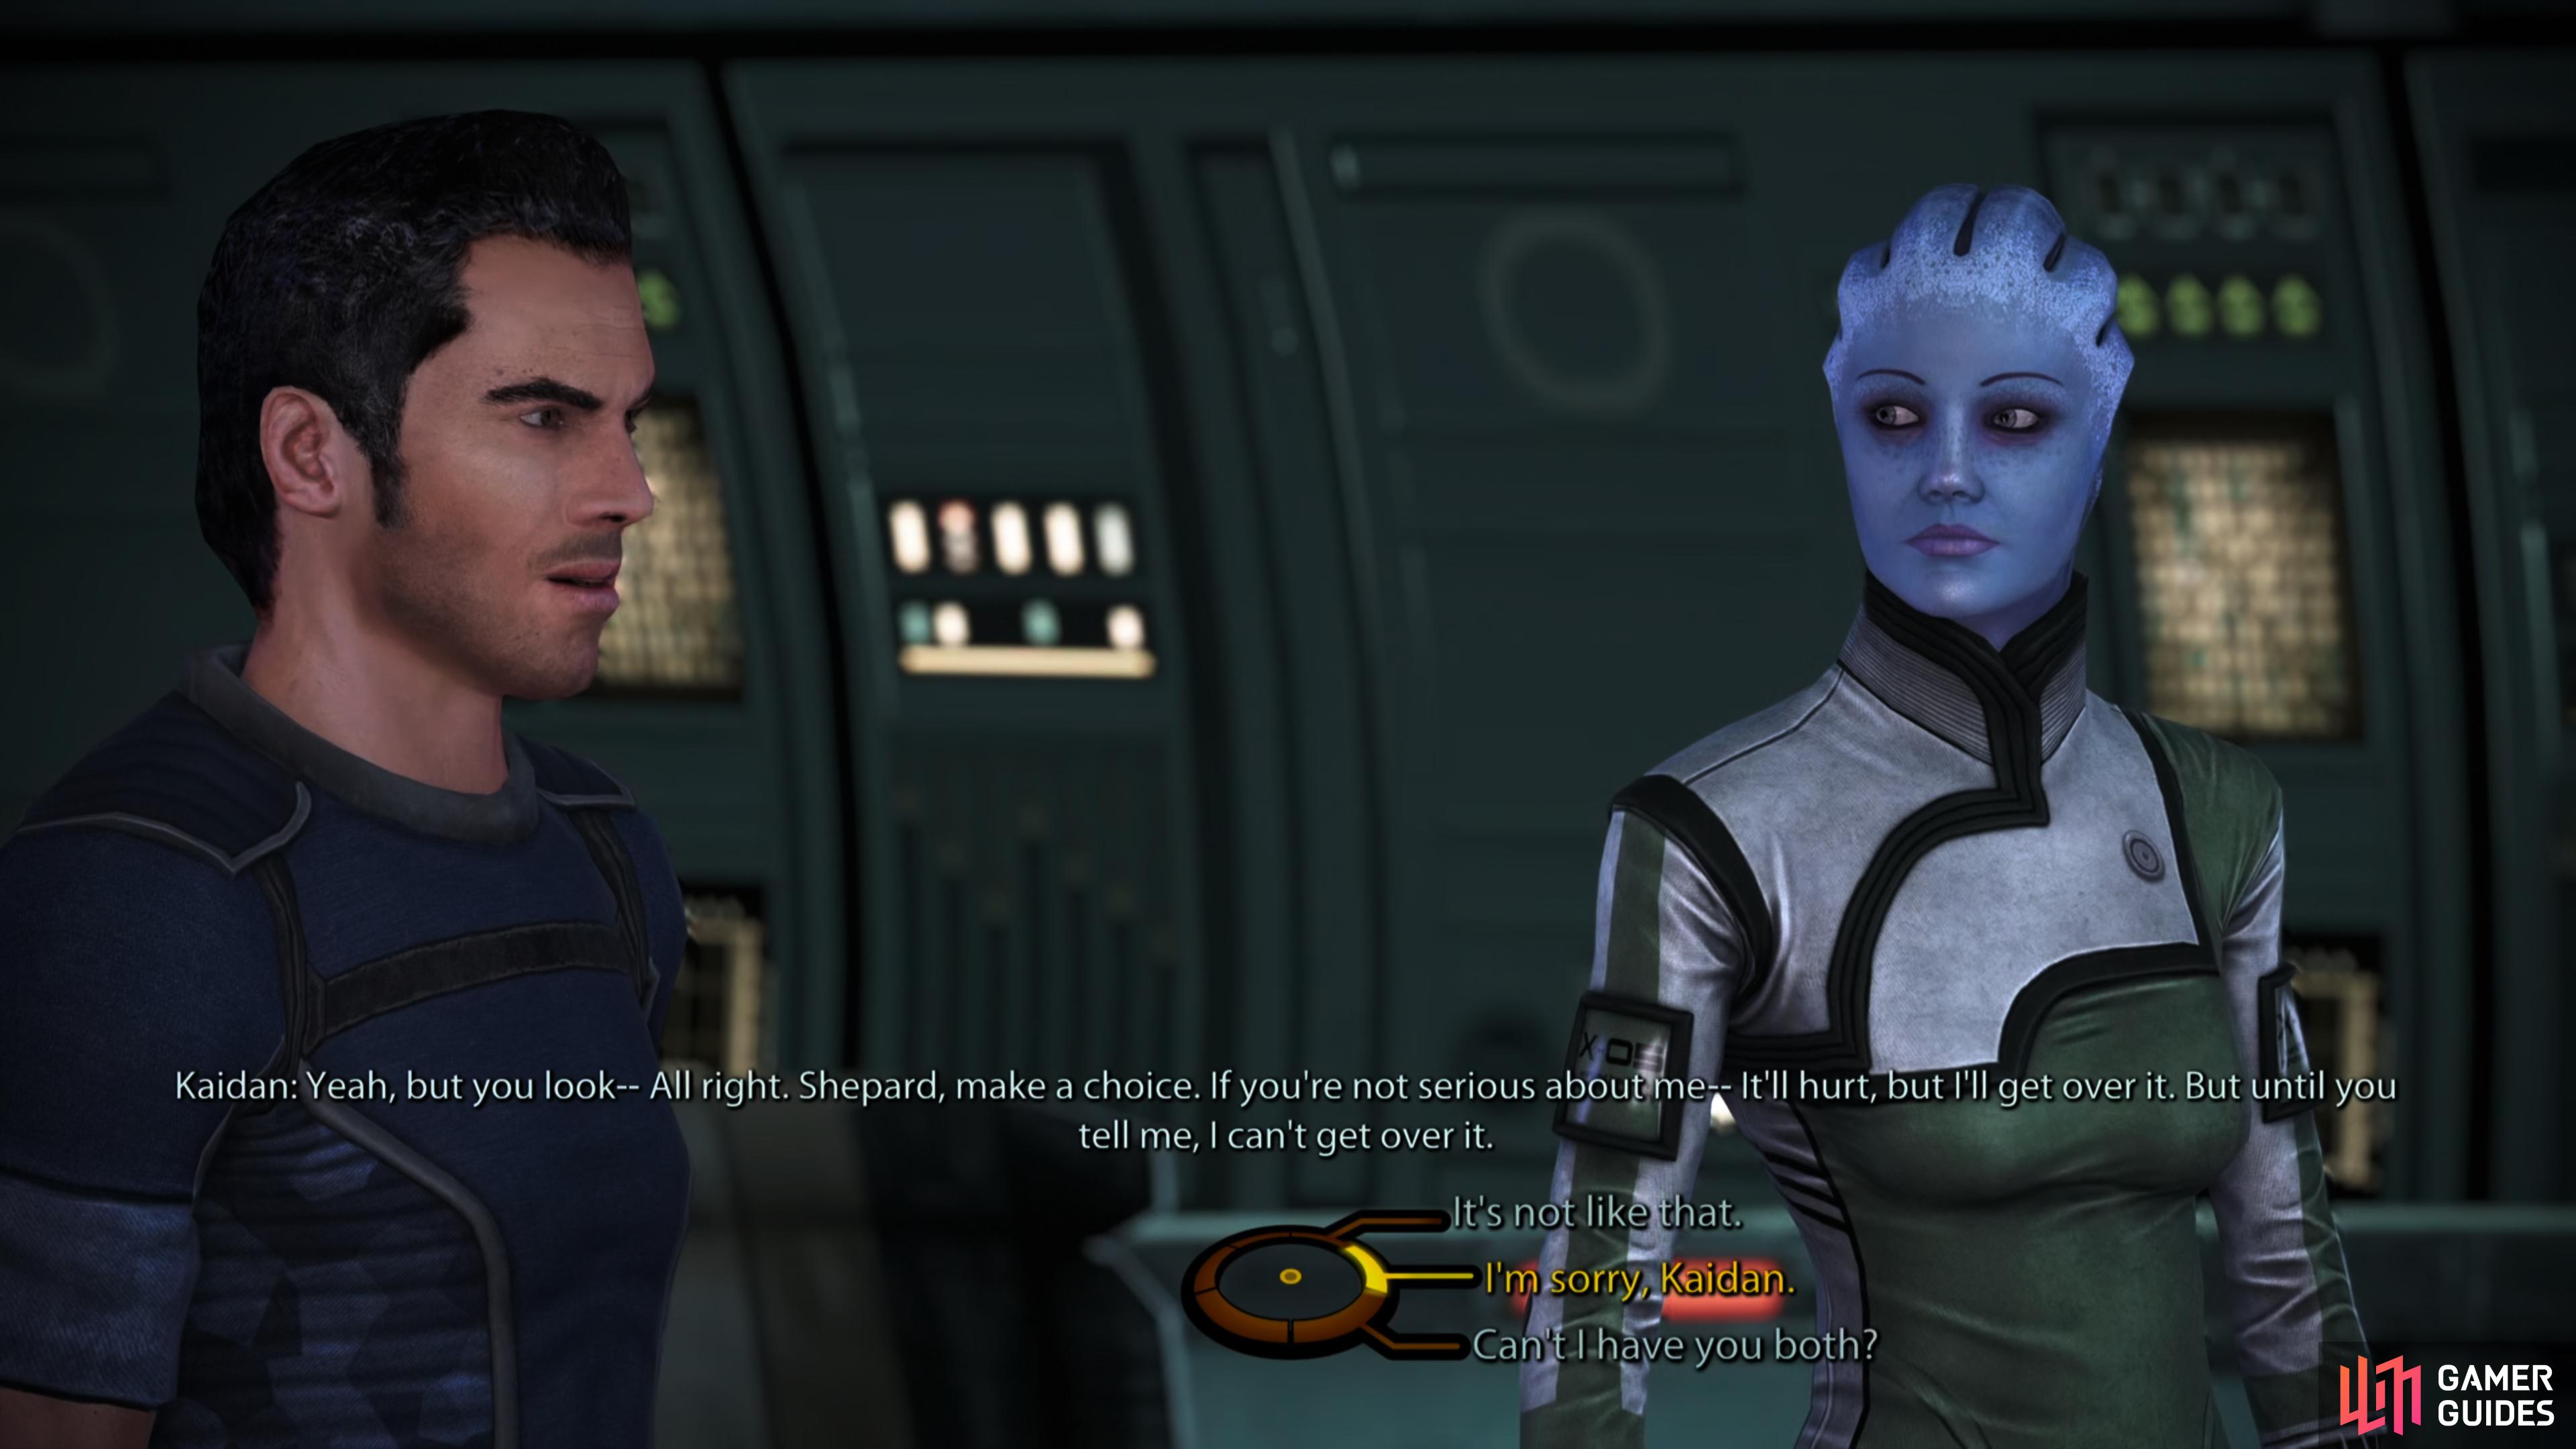 If you've been flirting with more than one companion, you'll have to cut one loose after three core missions.